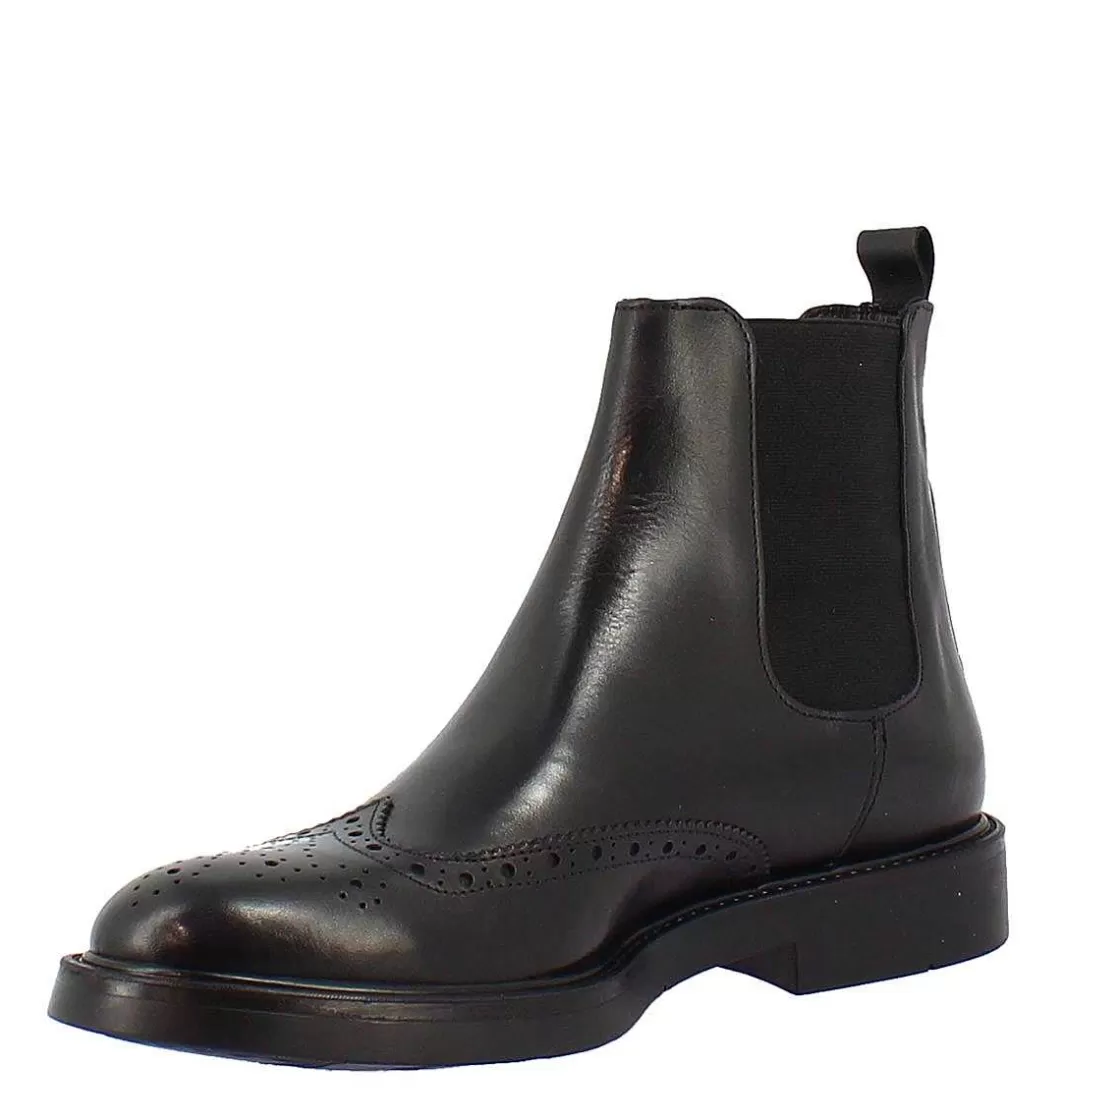 Leonardo Chelsea Boot In Black Leather With Rubber Sole Sale